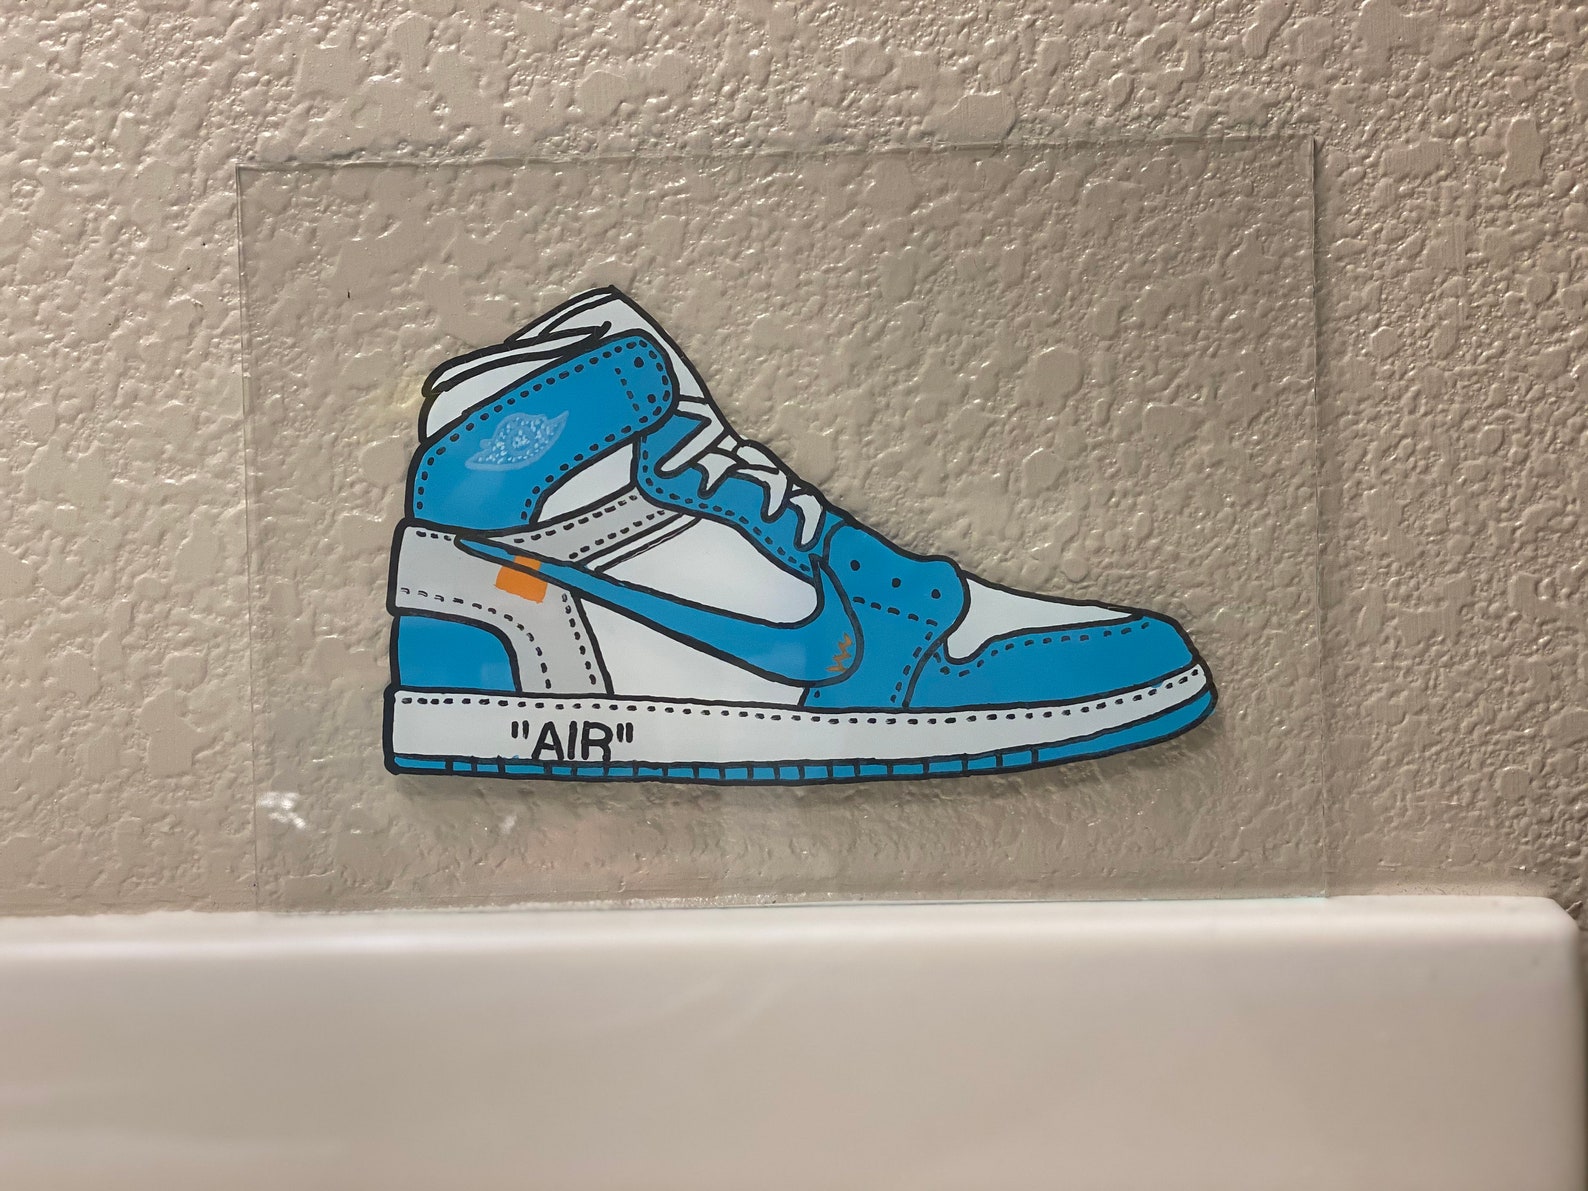 Off White Air Jordan 1 UNC Colorway Glass Painting | Etsy